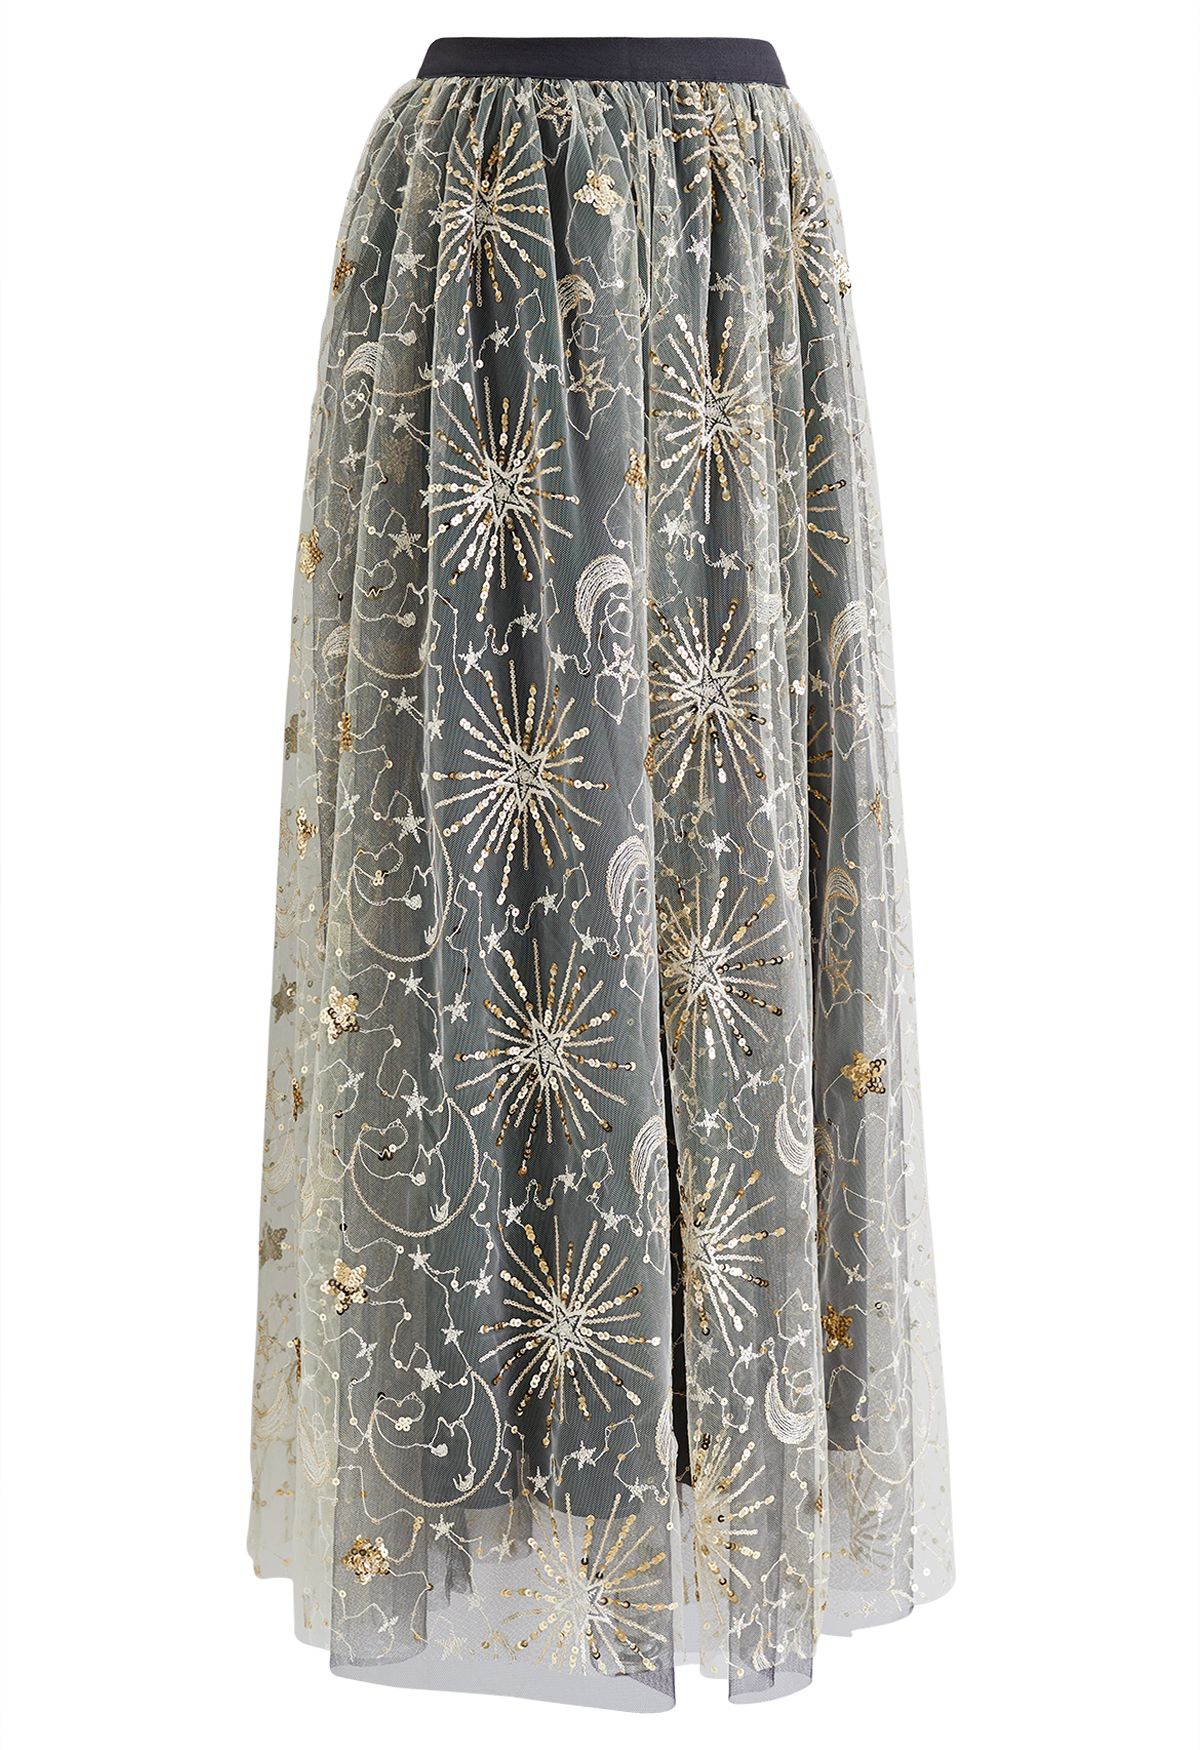 Moon and Star Sequin-Embellished Tulle Maxi Skirt in Black